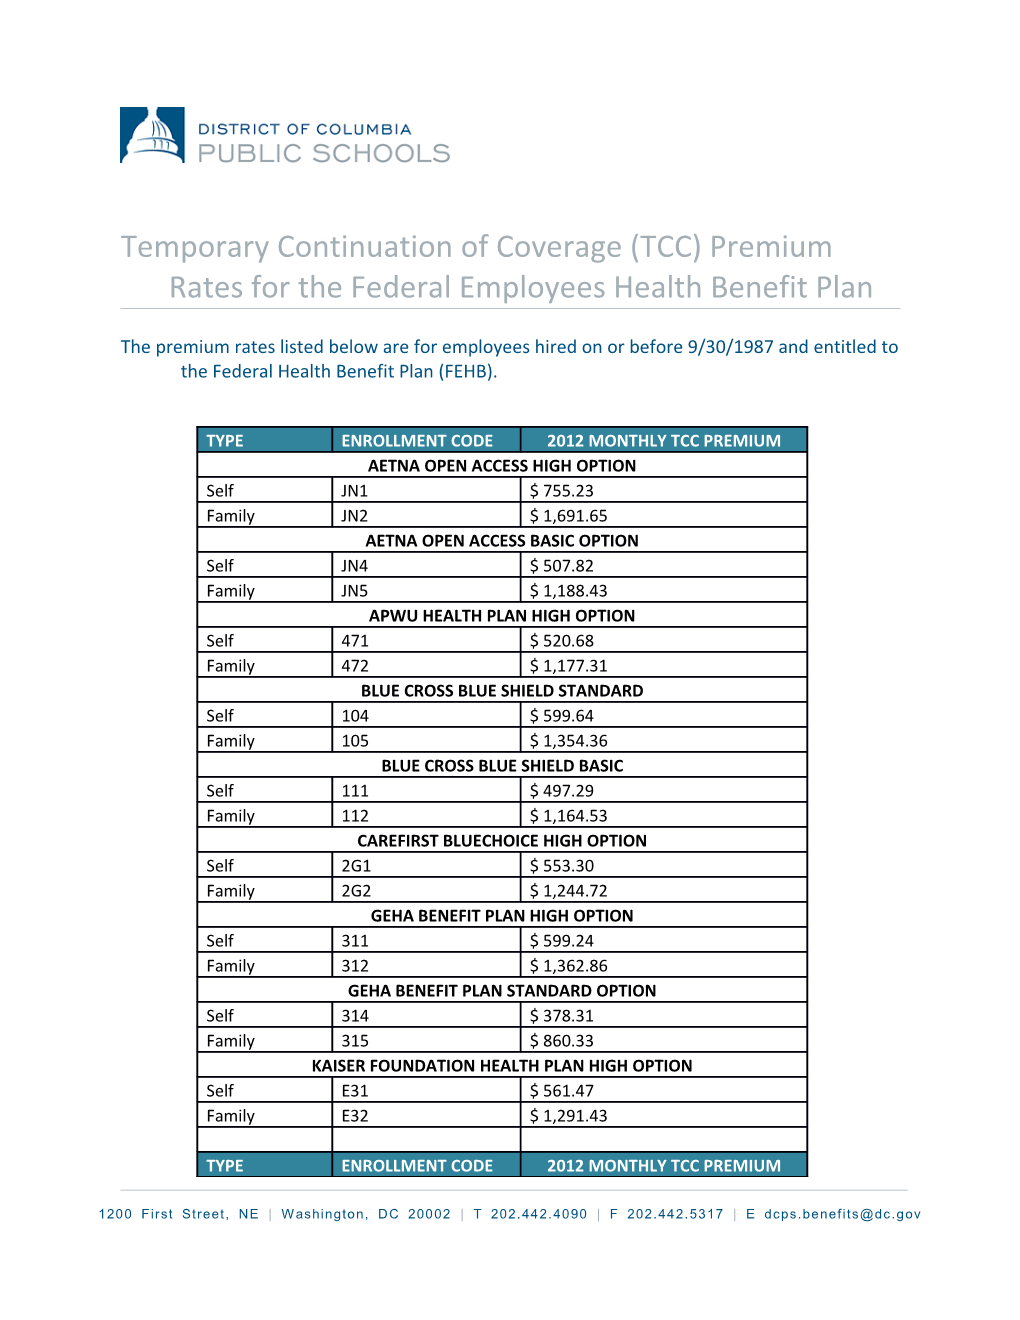 Temporary Continuation of Coverage (TCC) Premium Rates for the Federal Employees Health